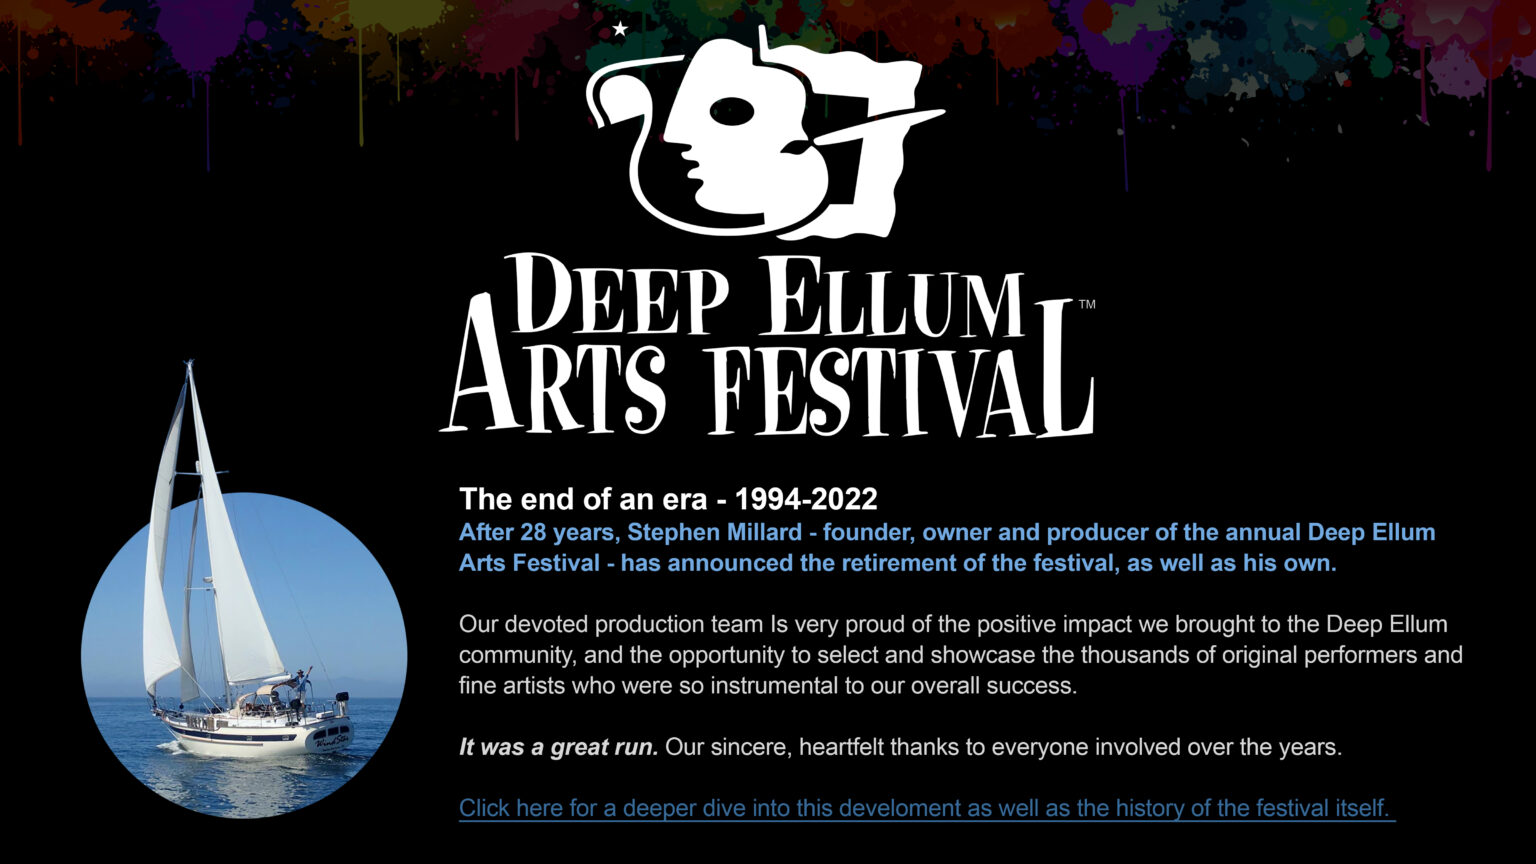 After 28 years, Stephen Millard has announced the retirement of the Deep Ellum Arts Festival